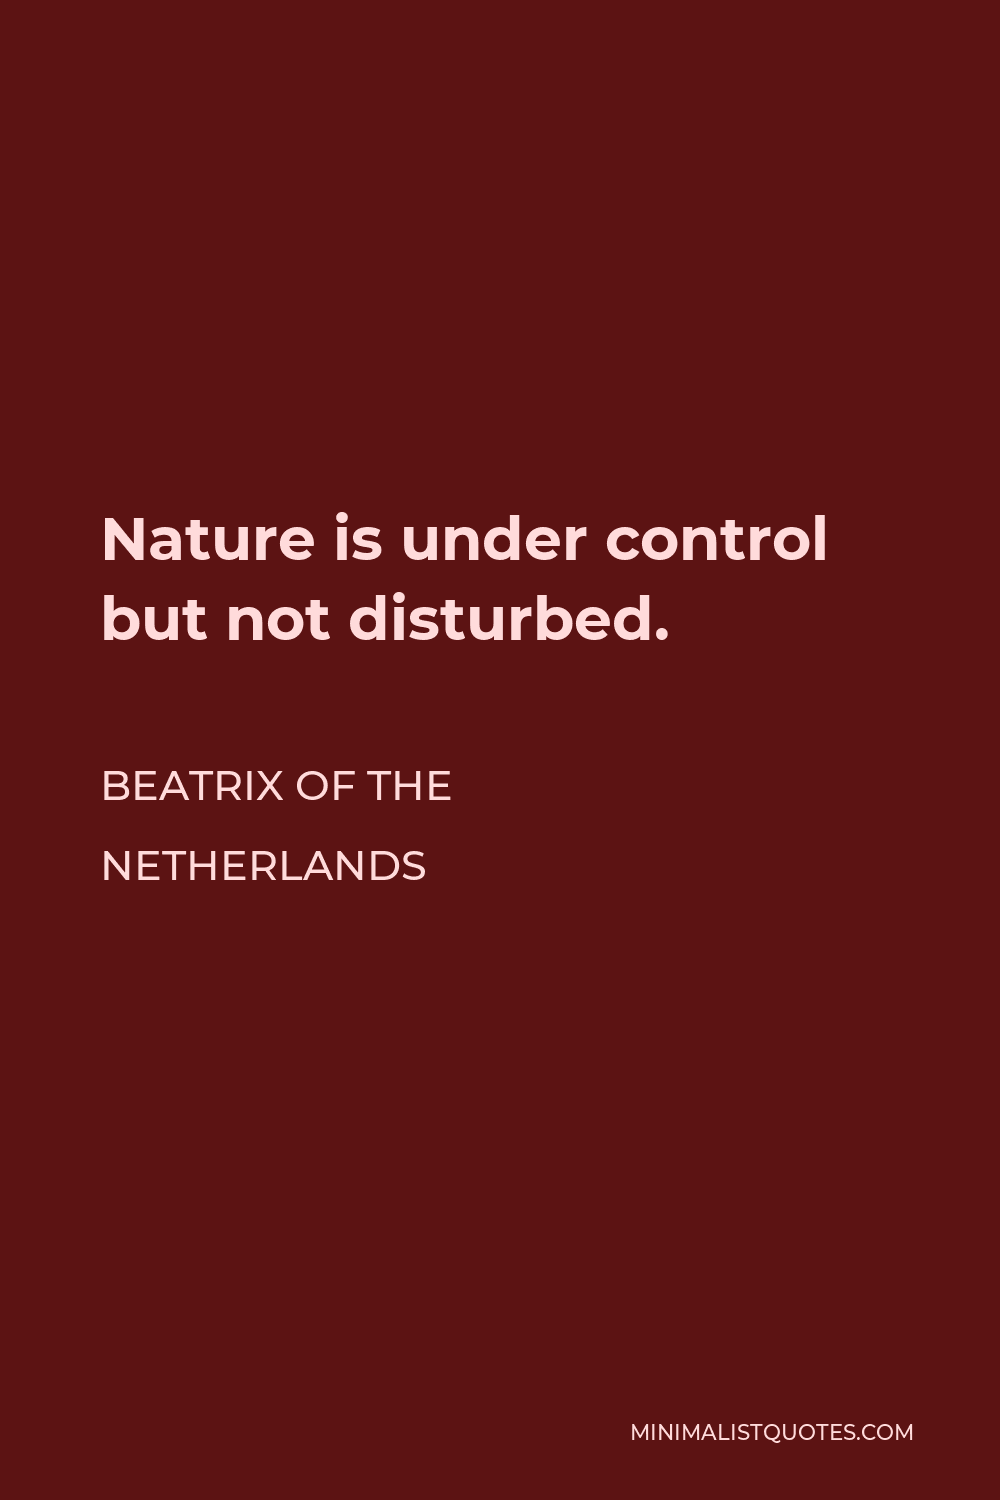 Beatrix of the Netherlands Quote - Nature is under control but not disturbed.